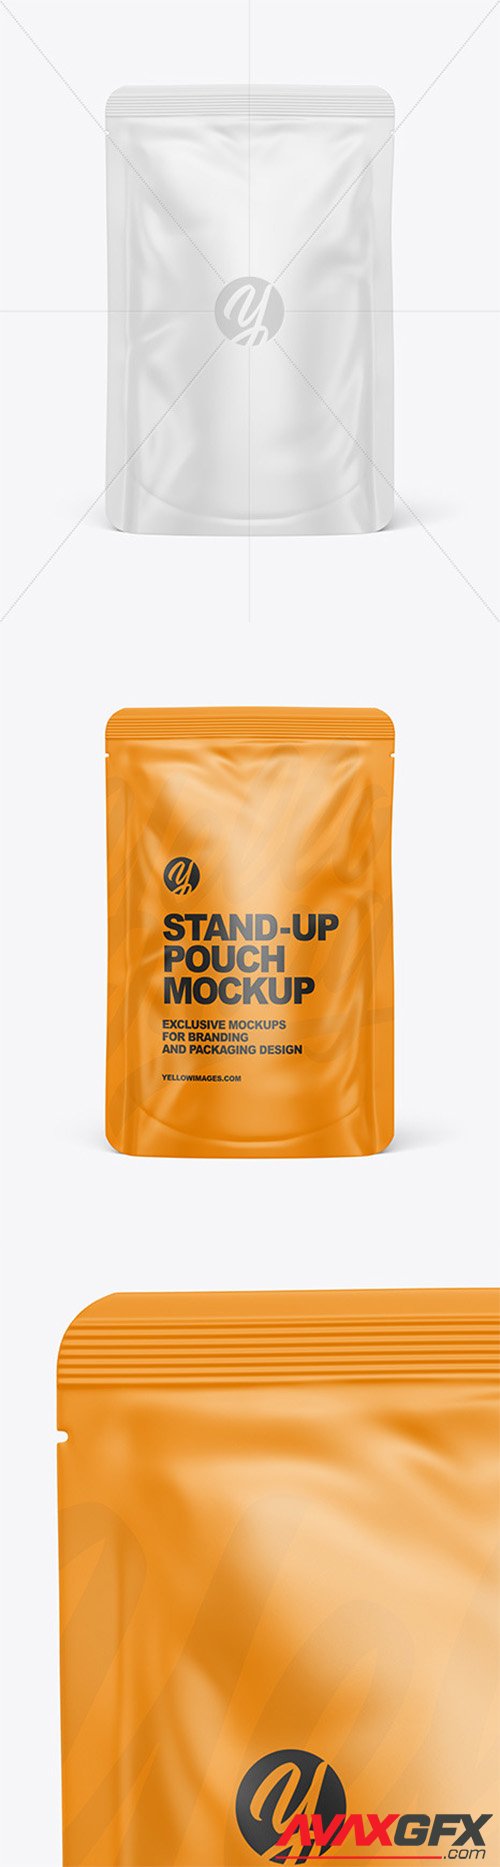 Download Matte Stand Up Pouch Mockup 59337 Avaxgfx All Downloads That You Need In One Place Graphic From Nitroflare Rapidgator PSD Mockup Templates